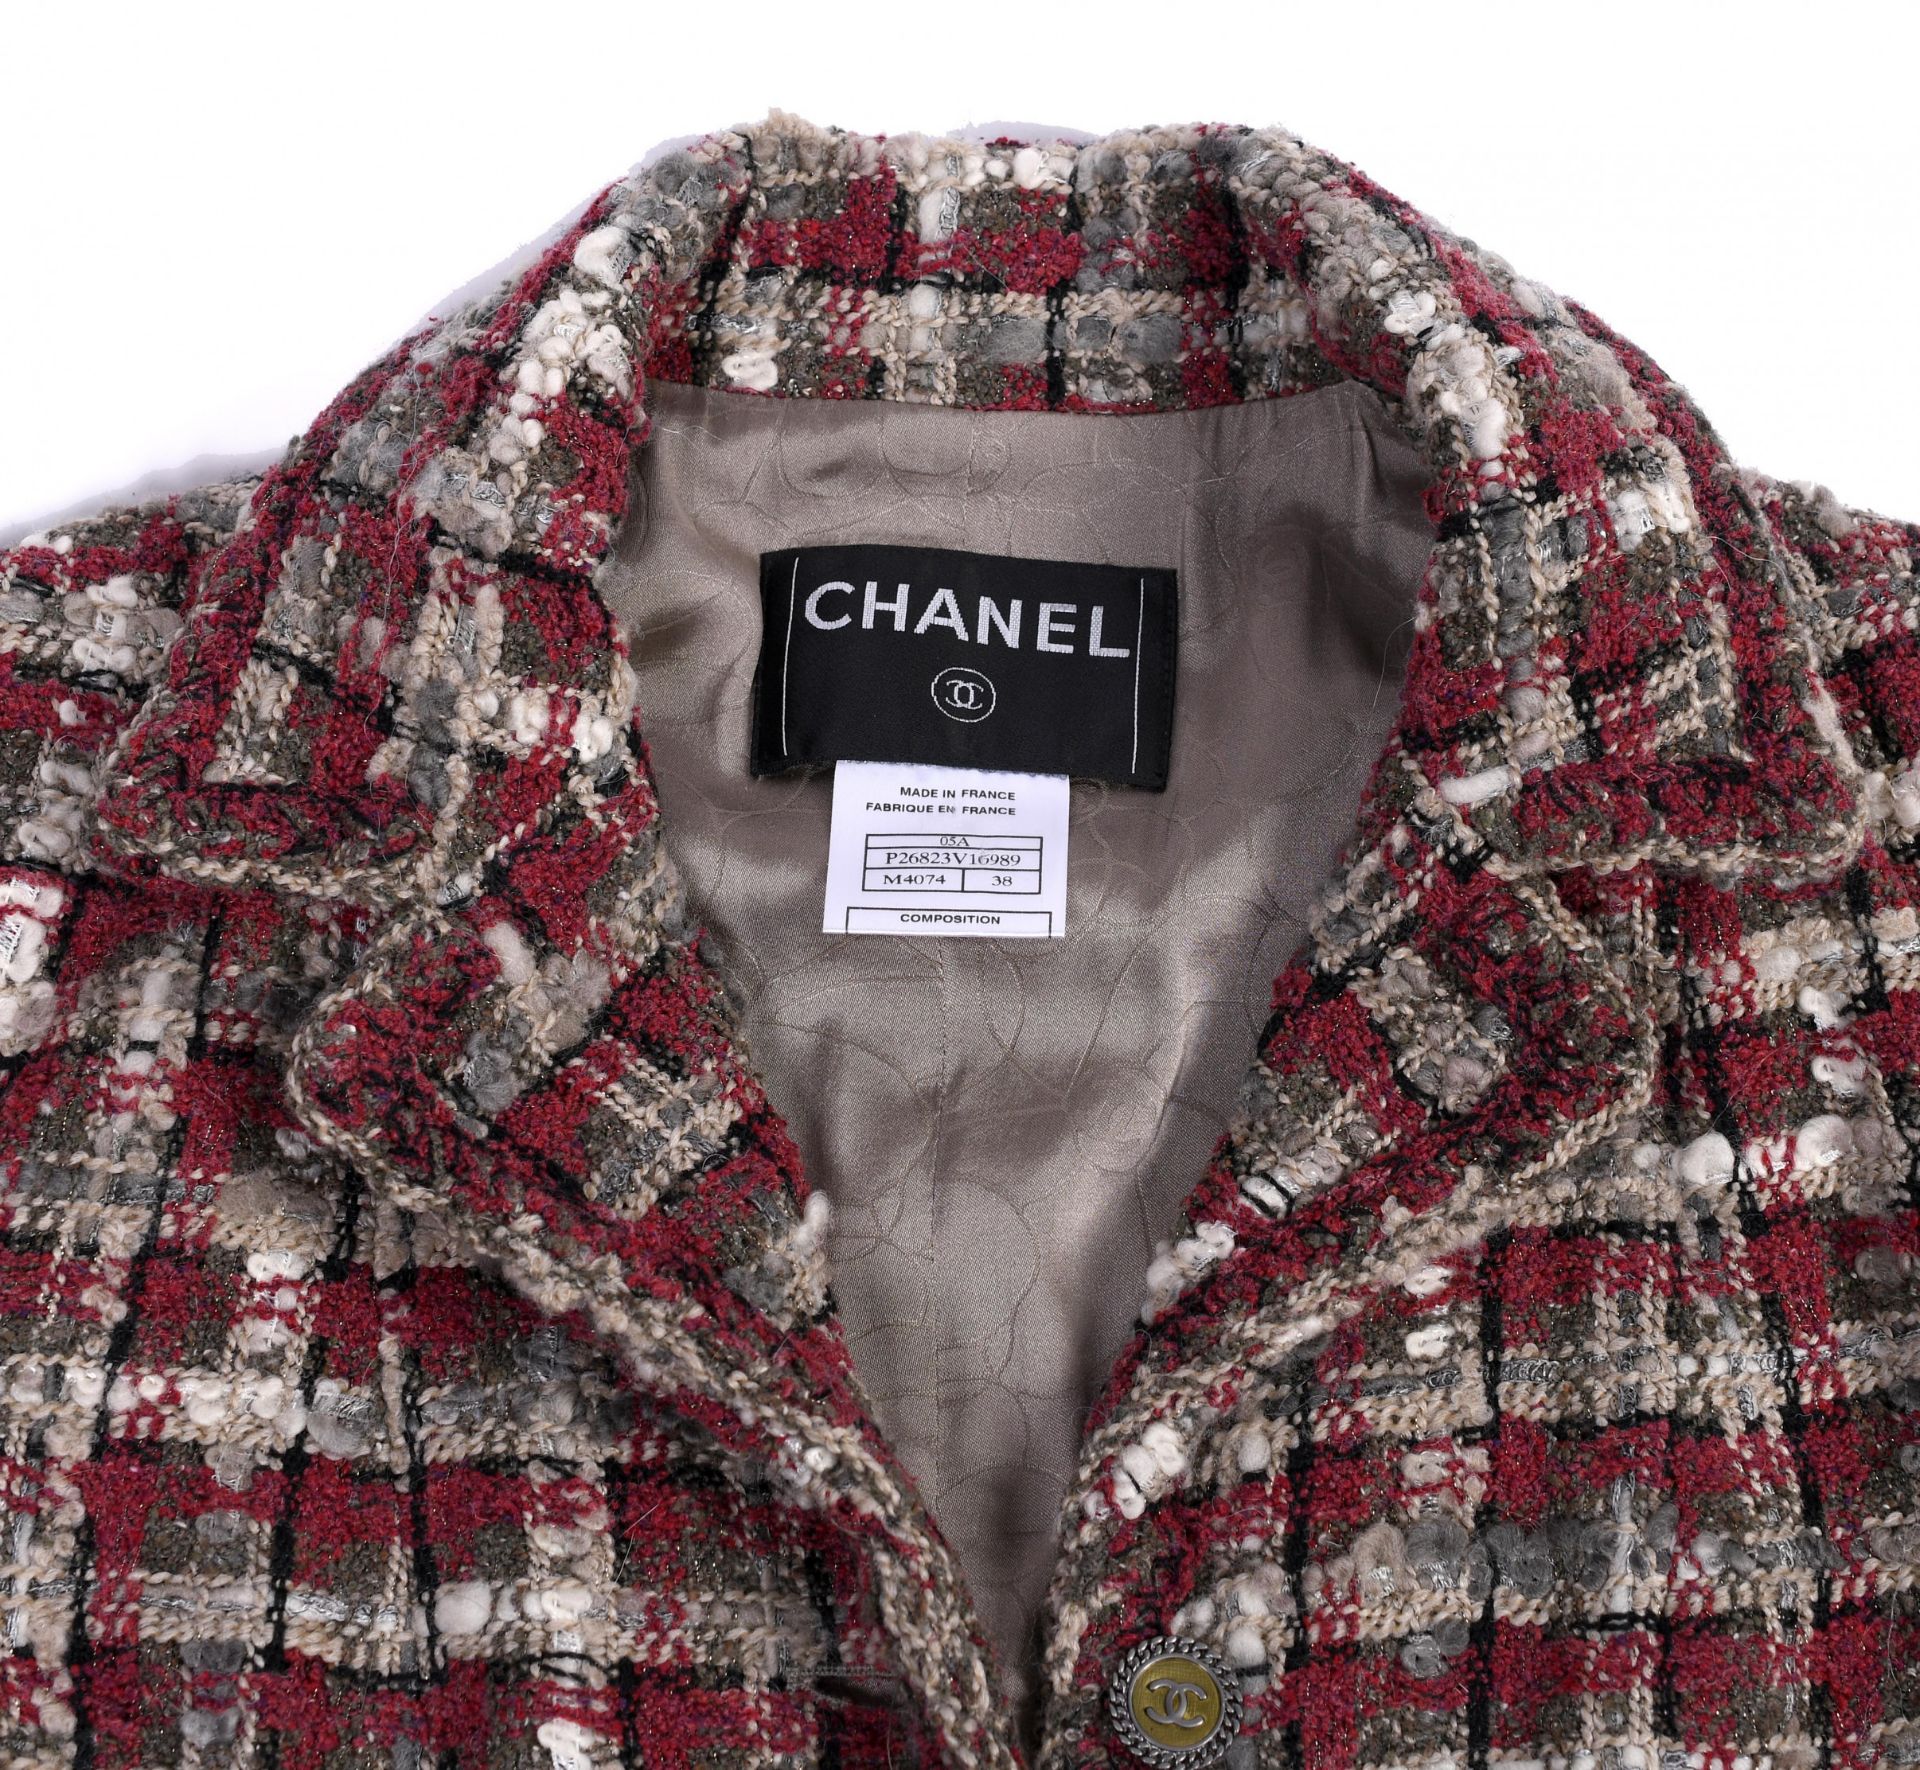 Chanel, - Image 7 of 7